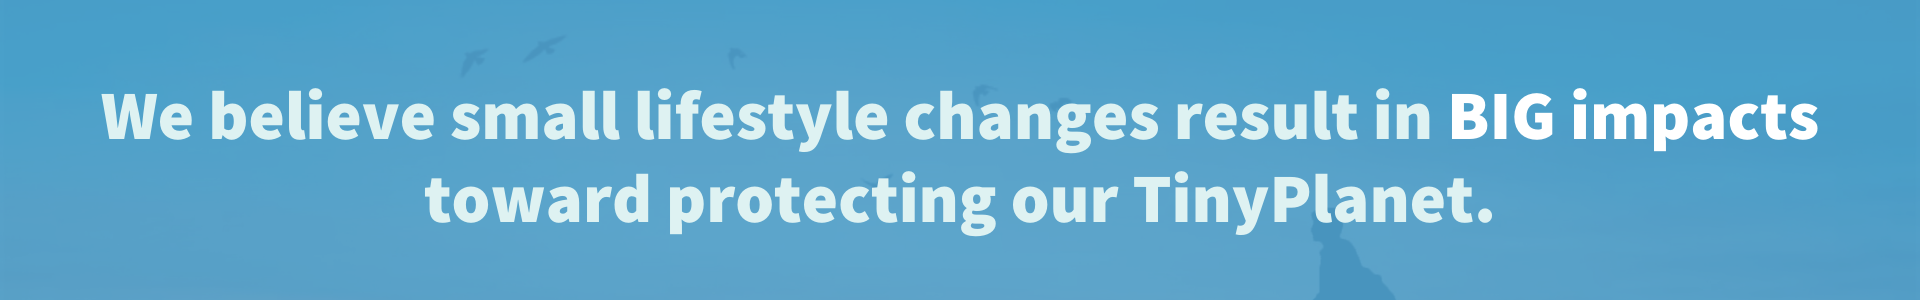 We believe small lifestyle changes results in big impacts towards protecting our TinyPlanet.